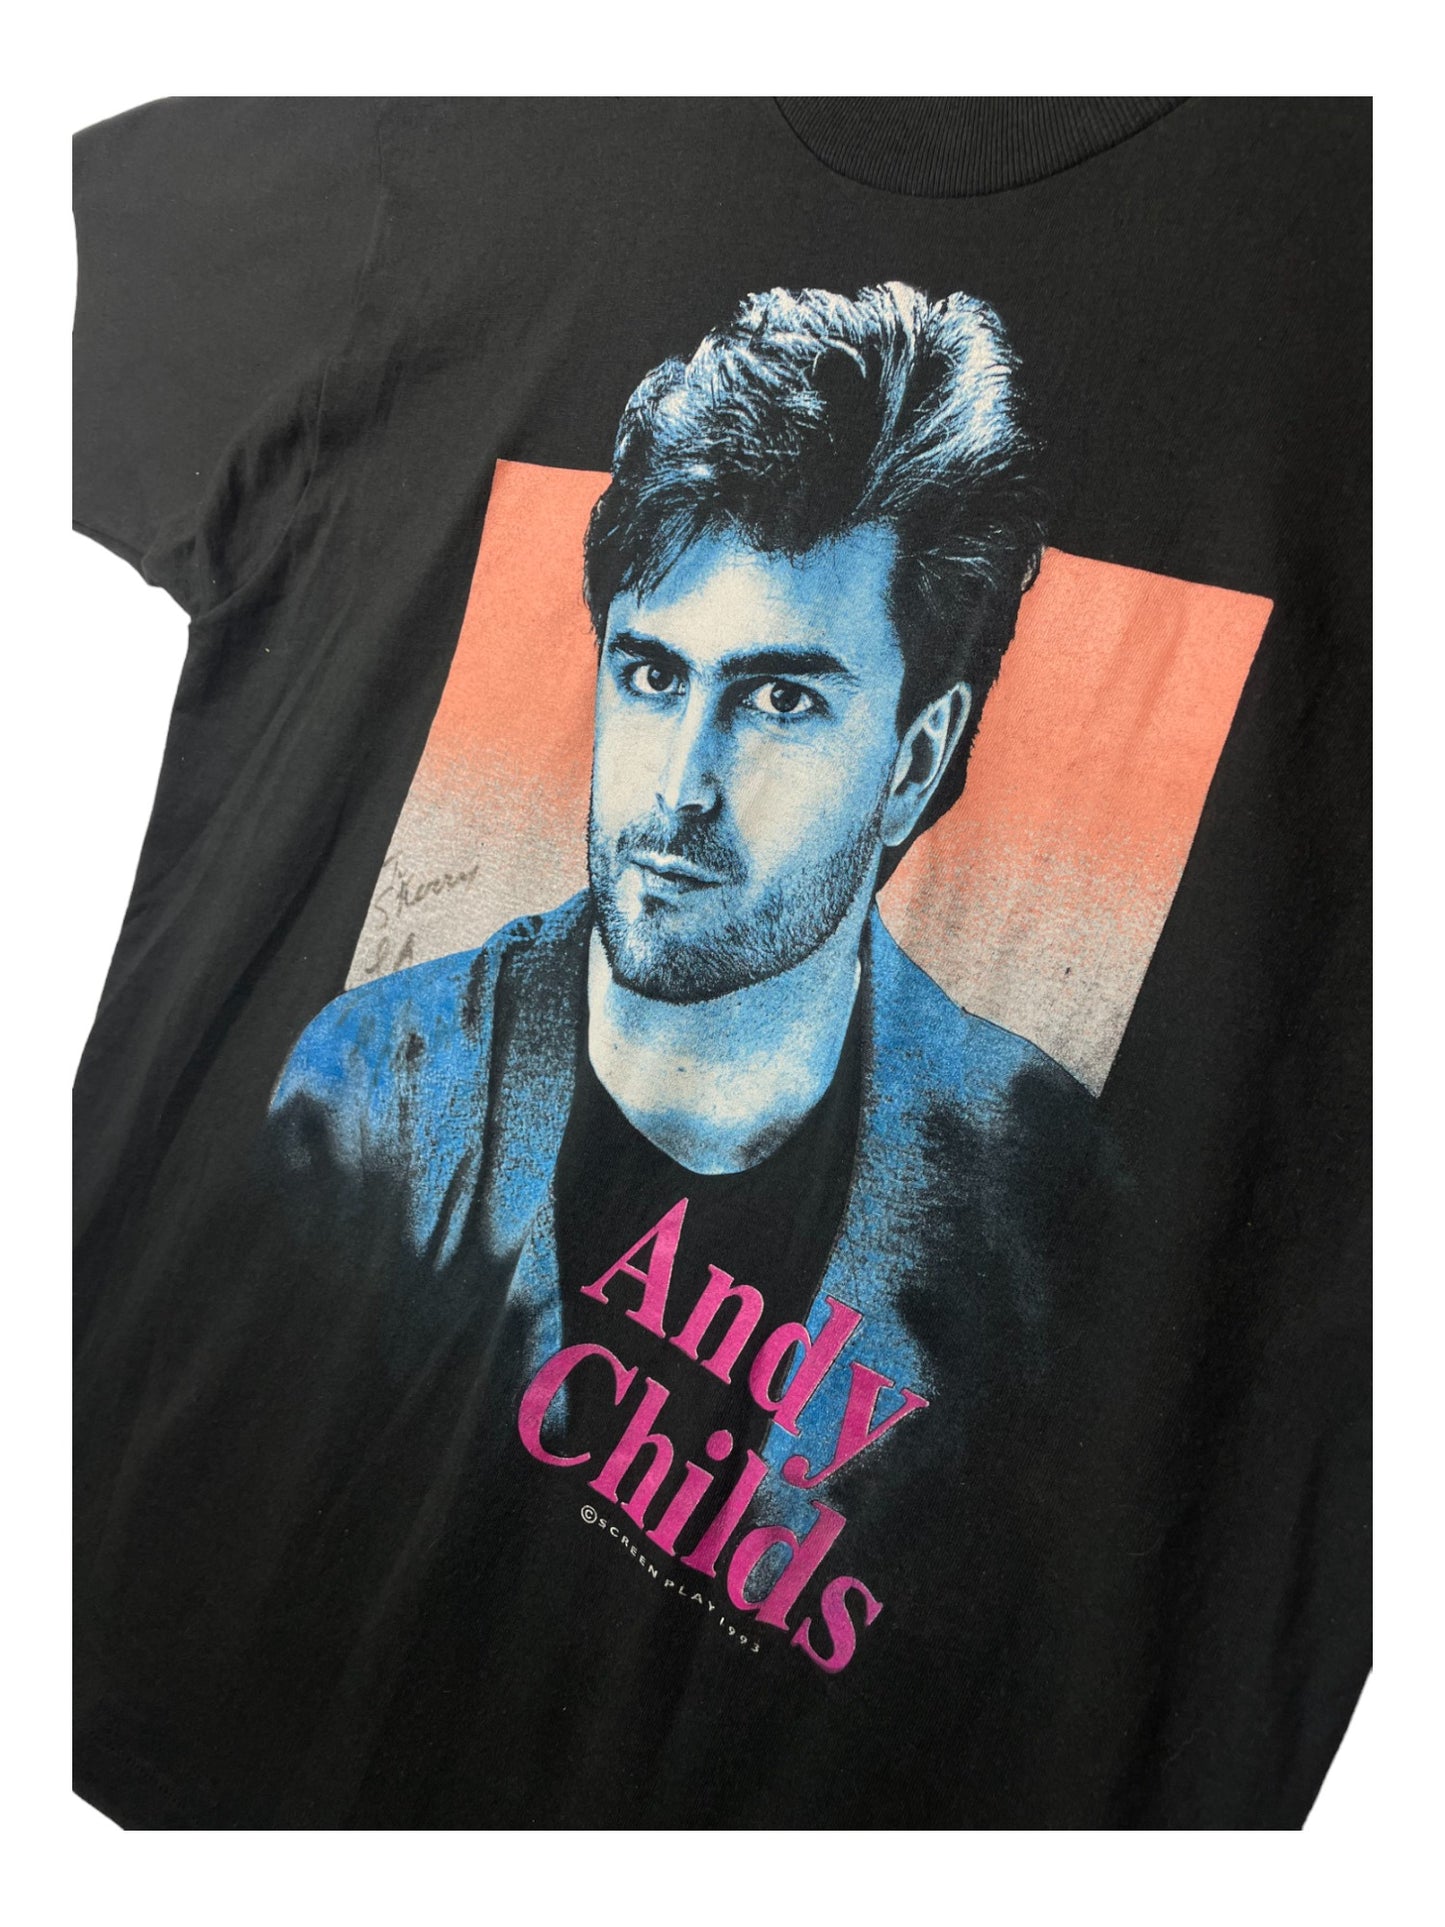 Andy Childs T-Shirt